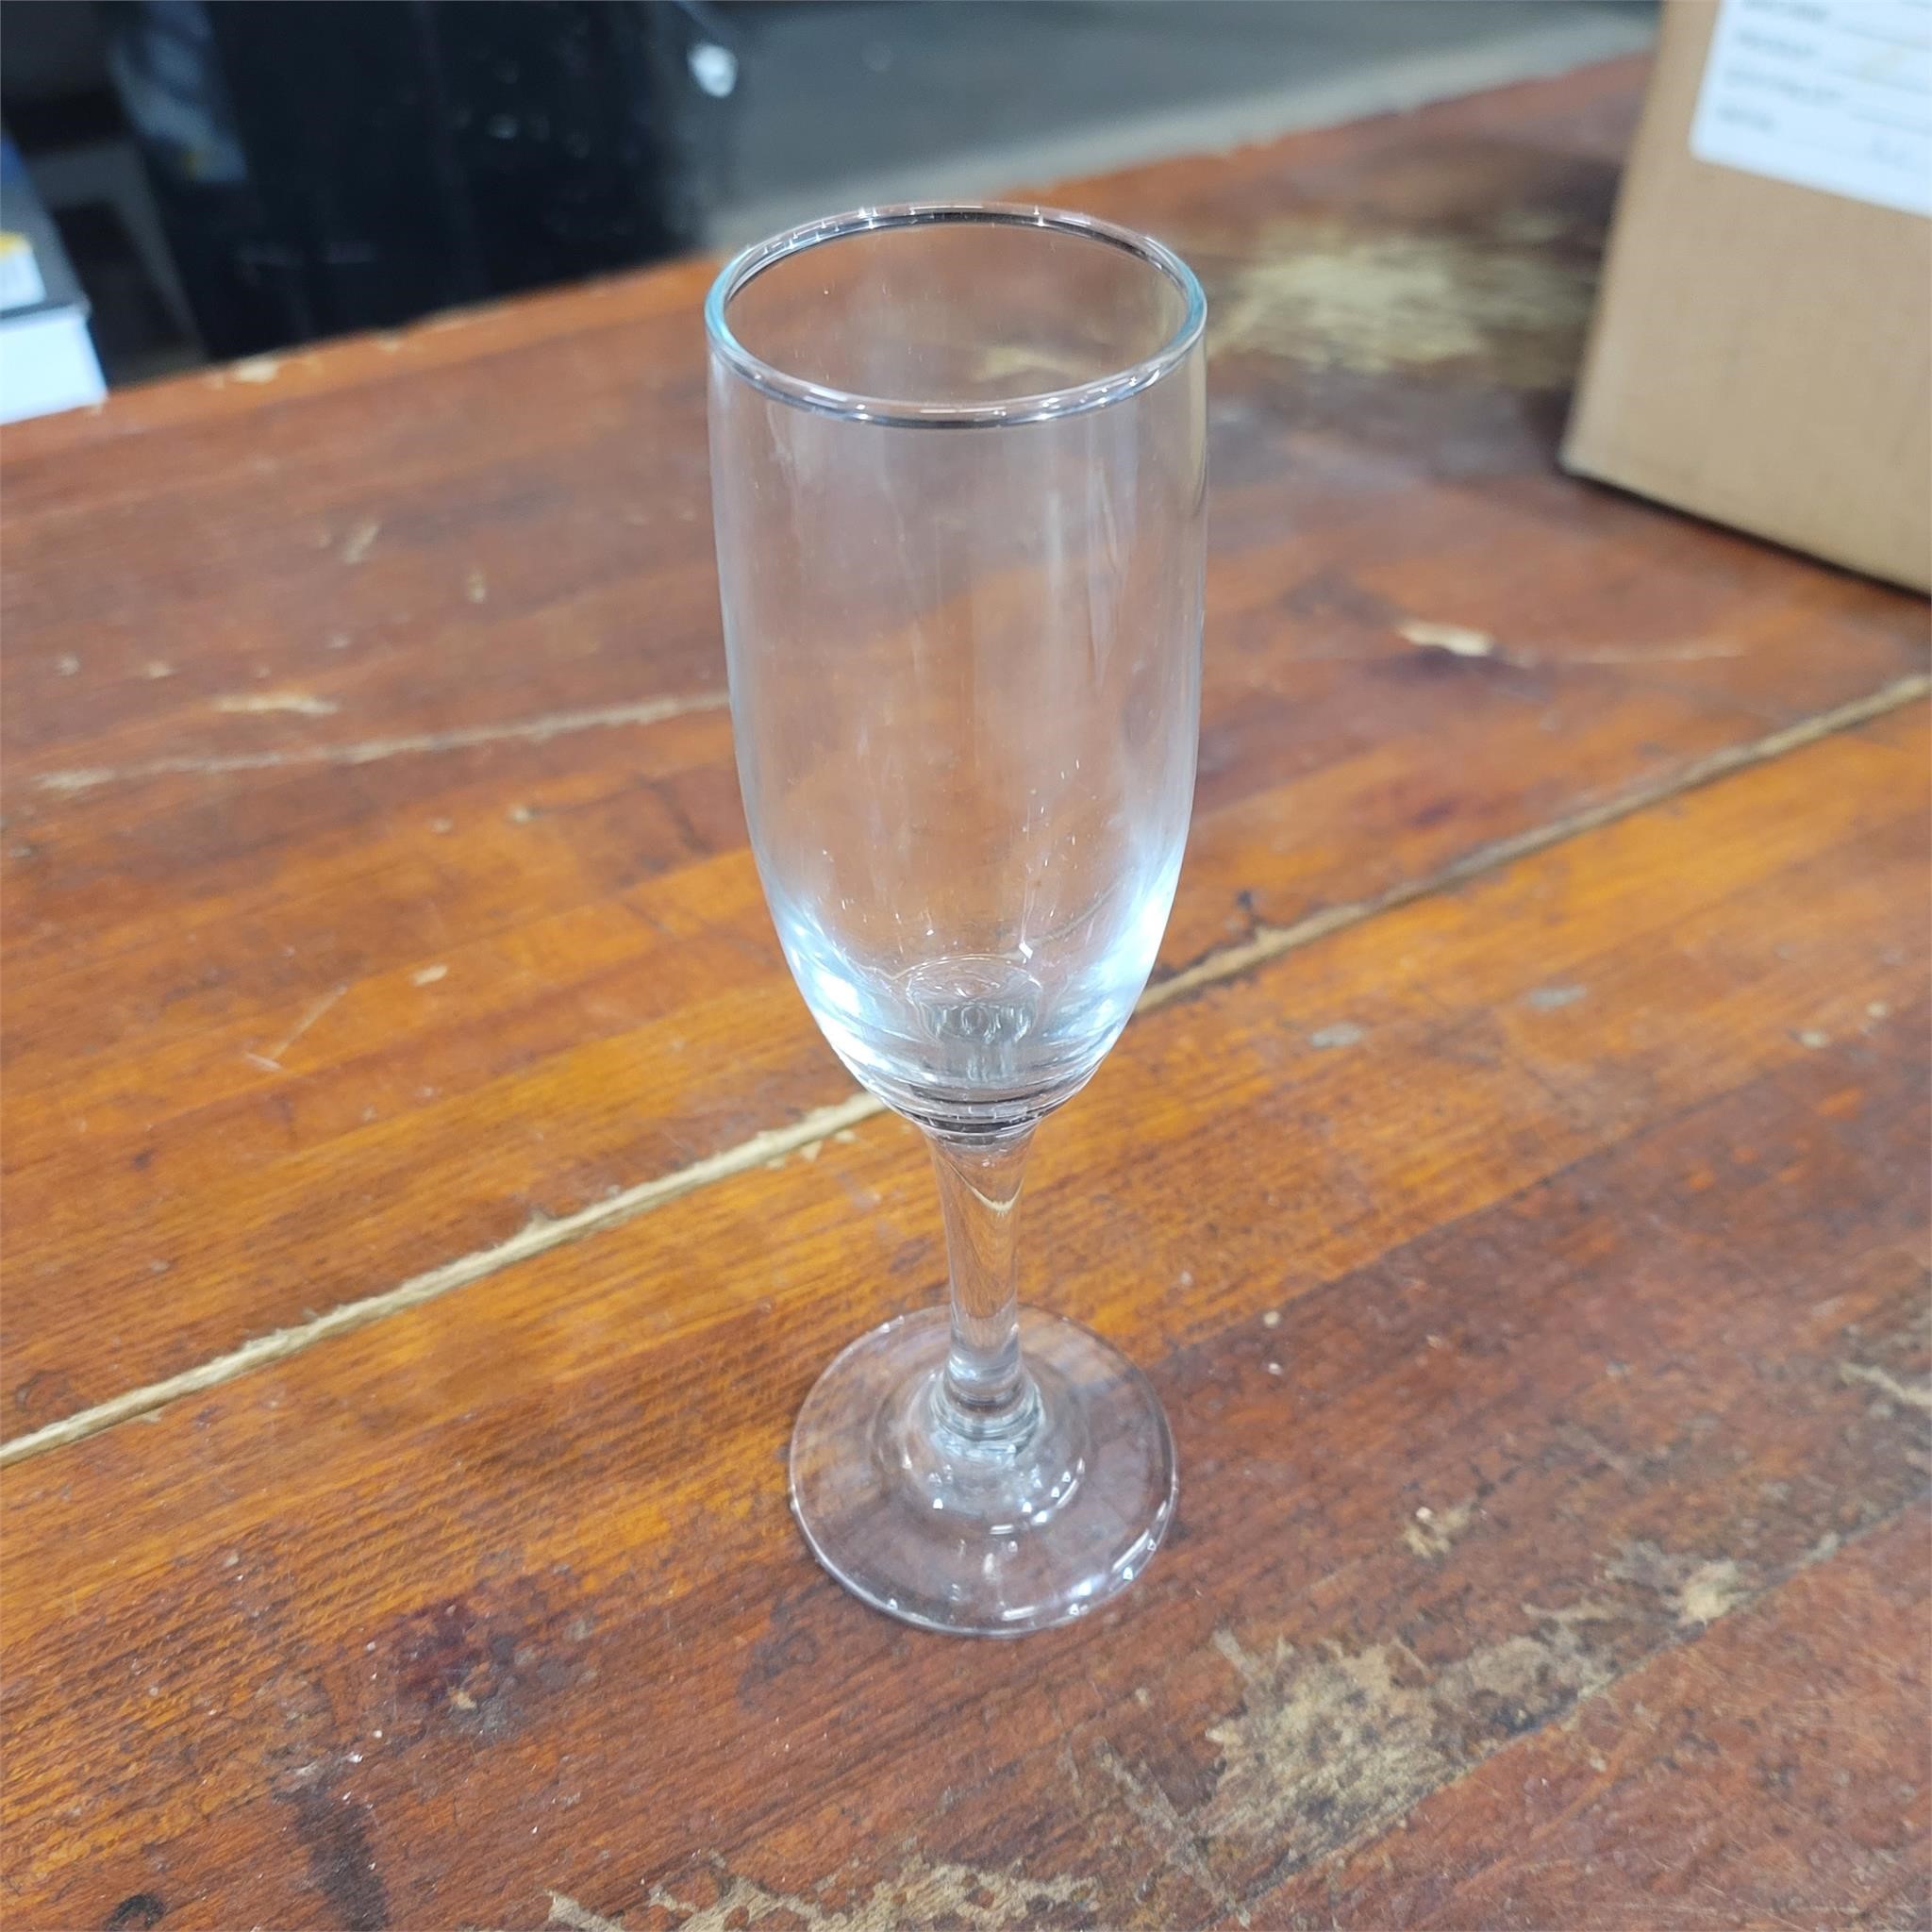 Case of Champagne Flutes